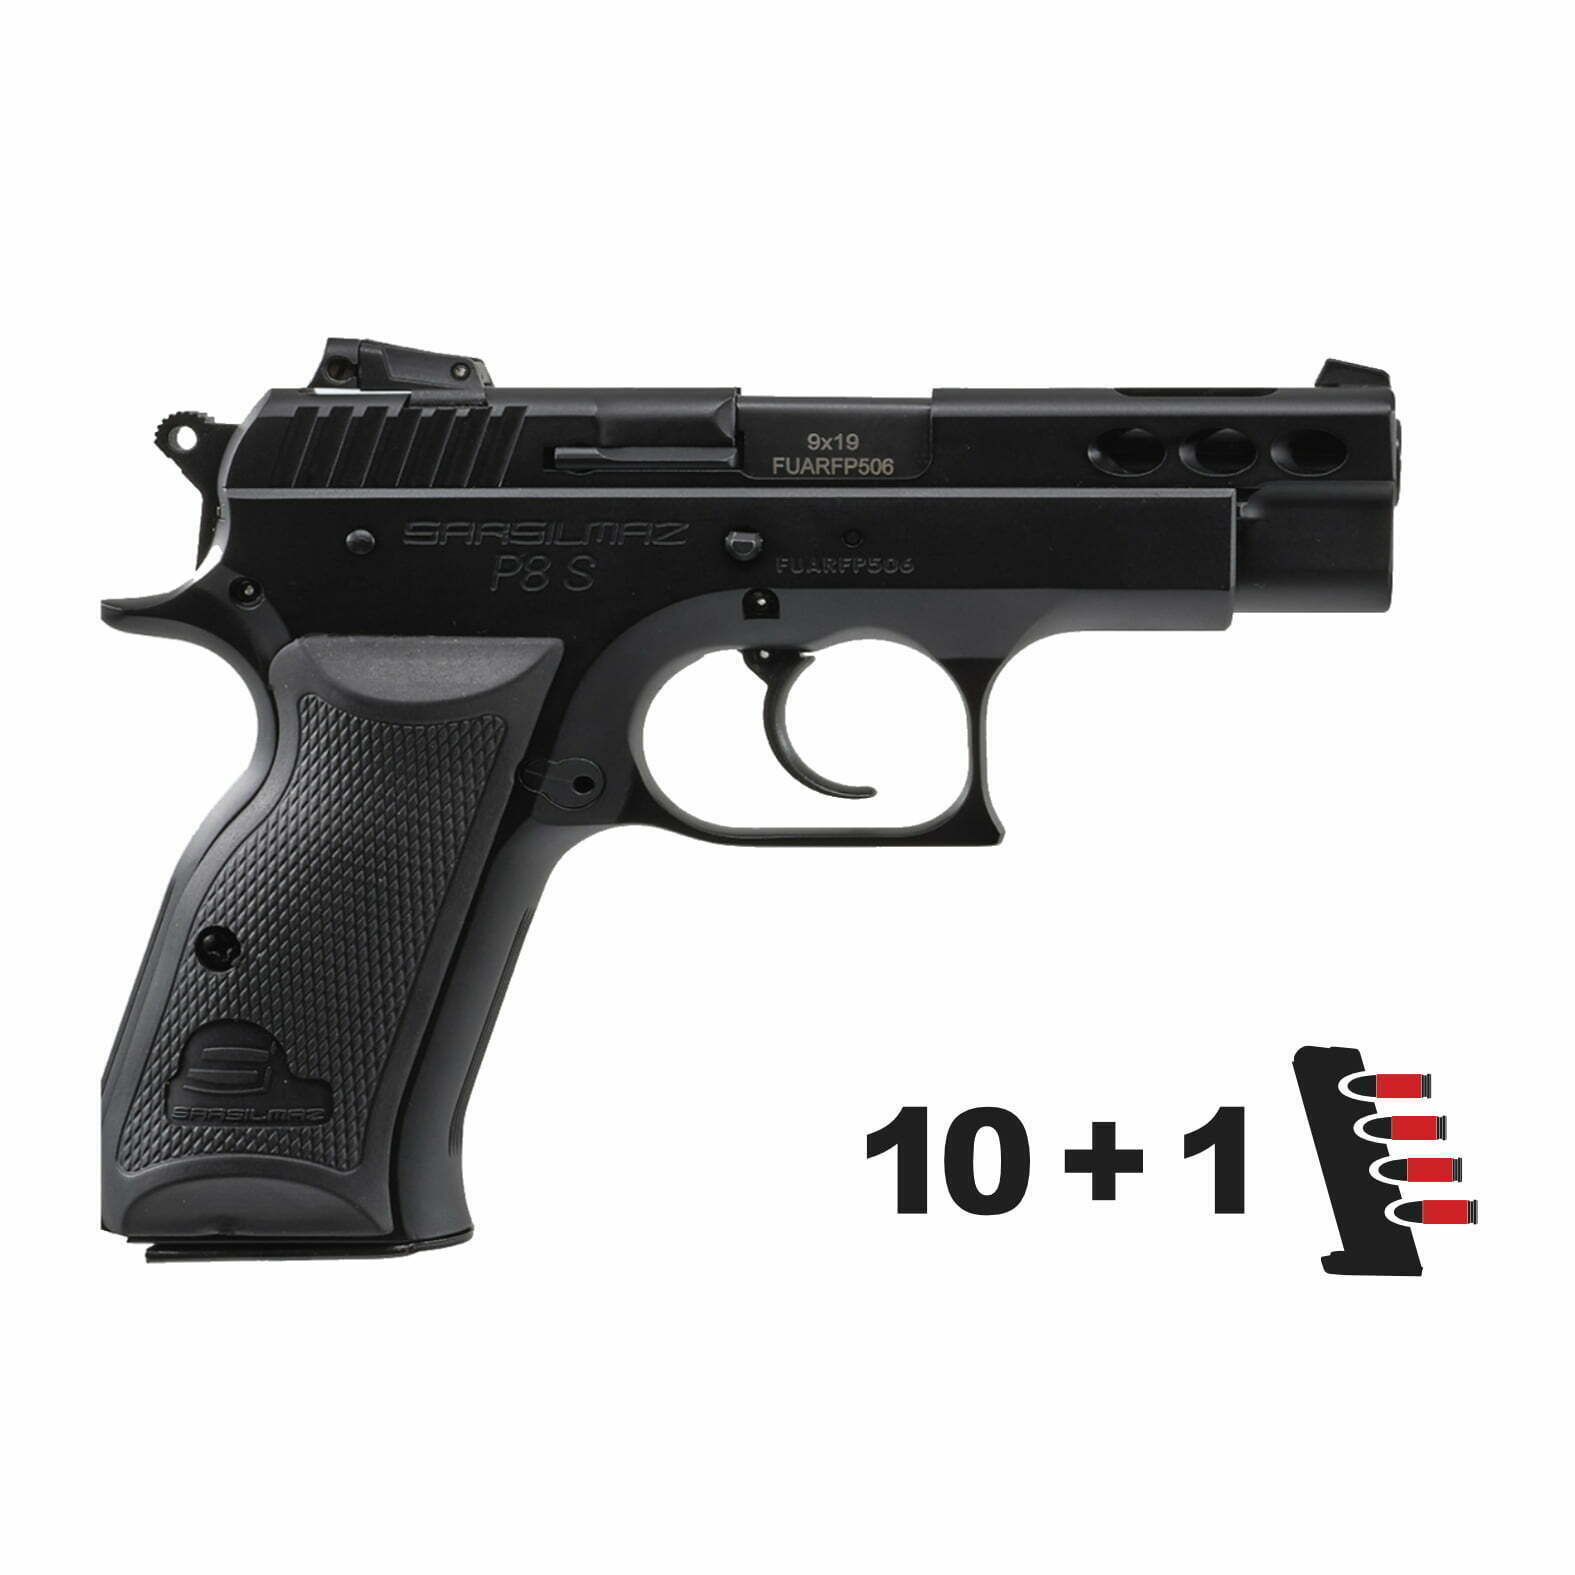 P8SBL10 - SAR P8S Compact Black 9mm - 10 rounds